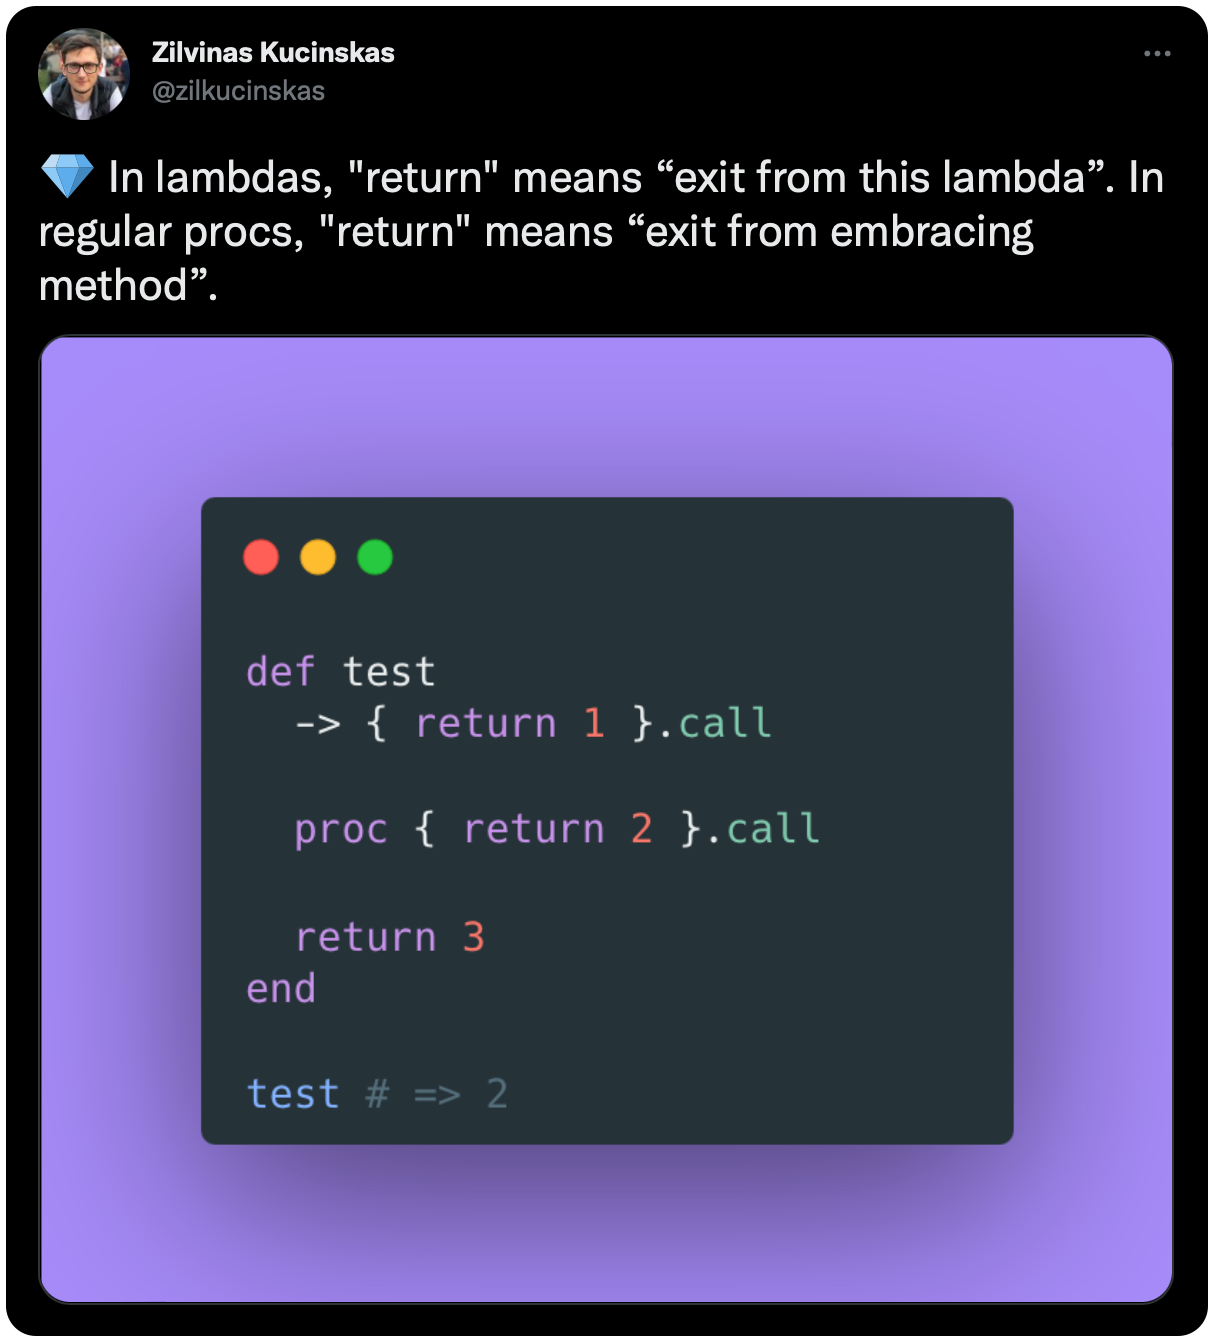 💎 In lambdas, "return" means “exit from this lambda”. In regular procs, "return" means “exit from embracing method”.